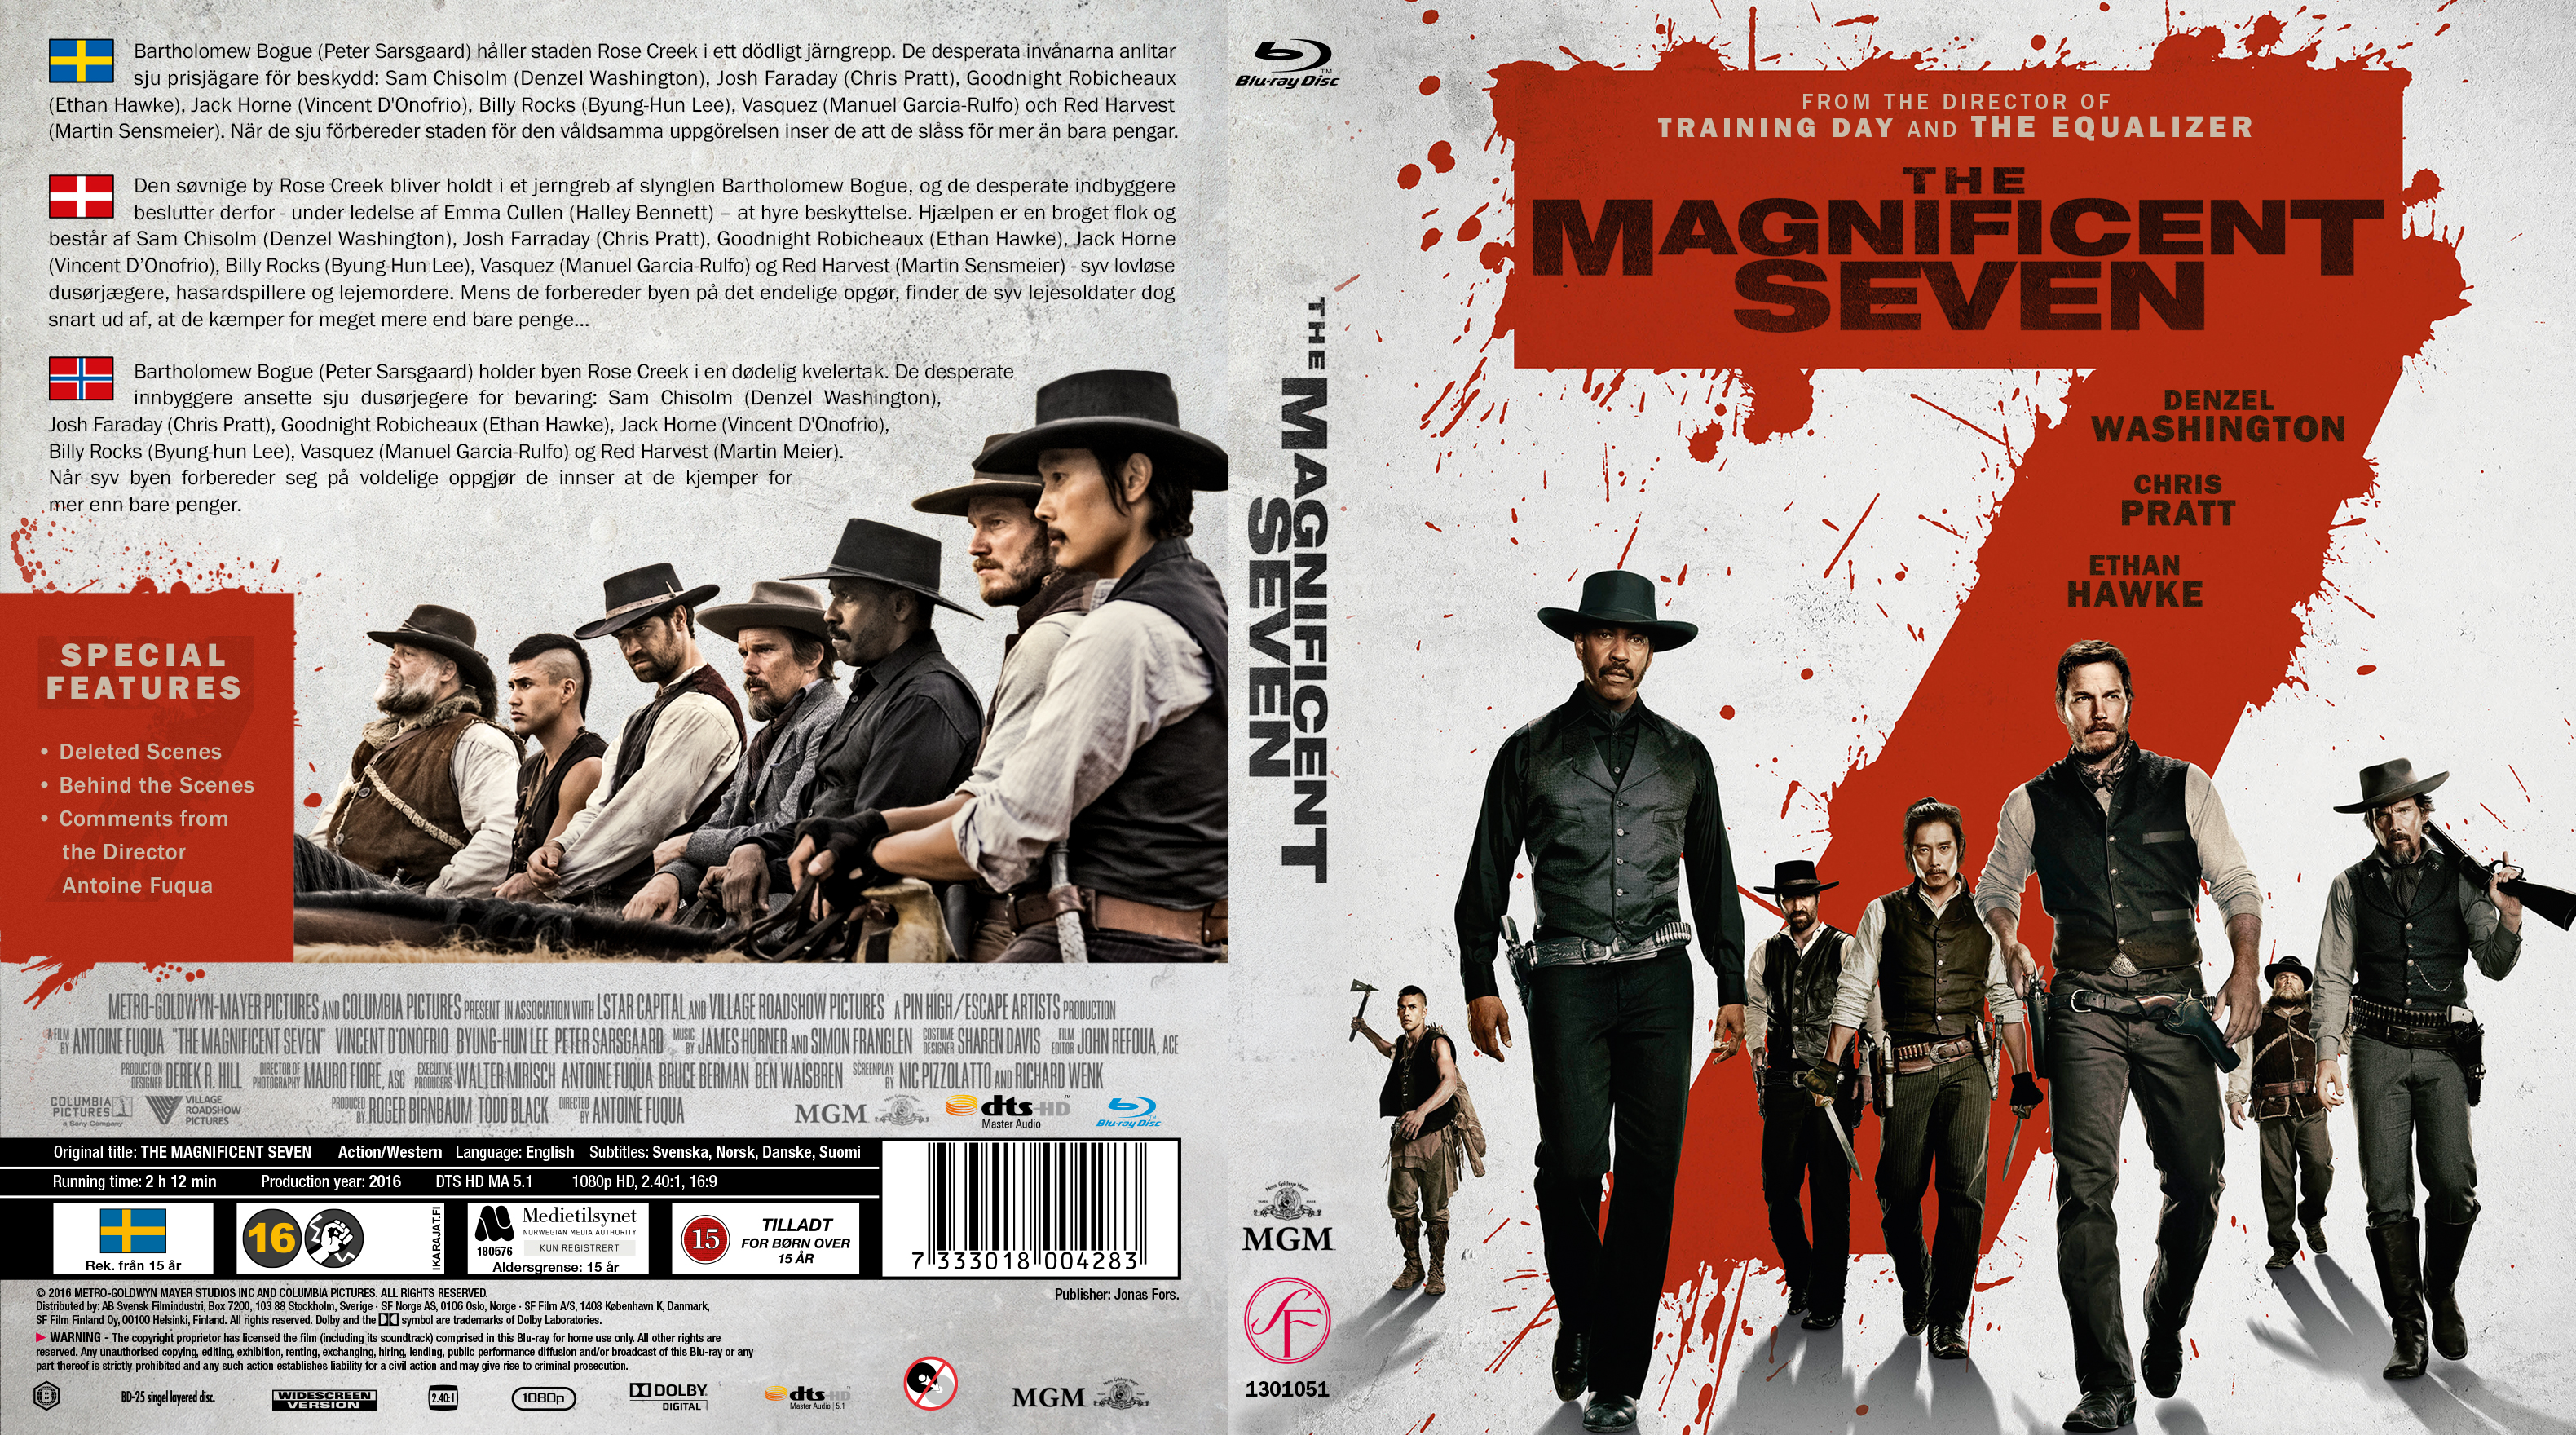 The Magnificent Seven (2016) - Front | DVD Covers | Cover ...